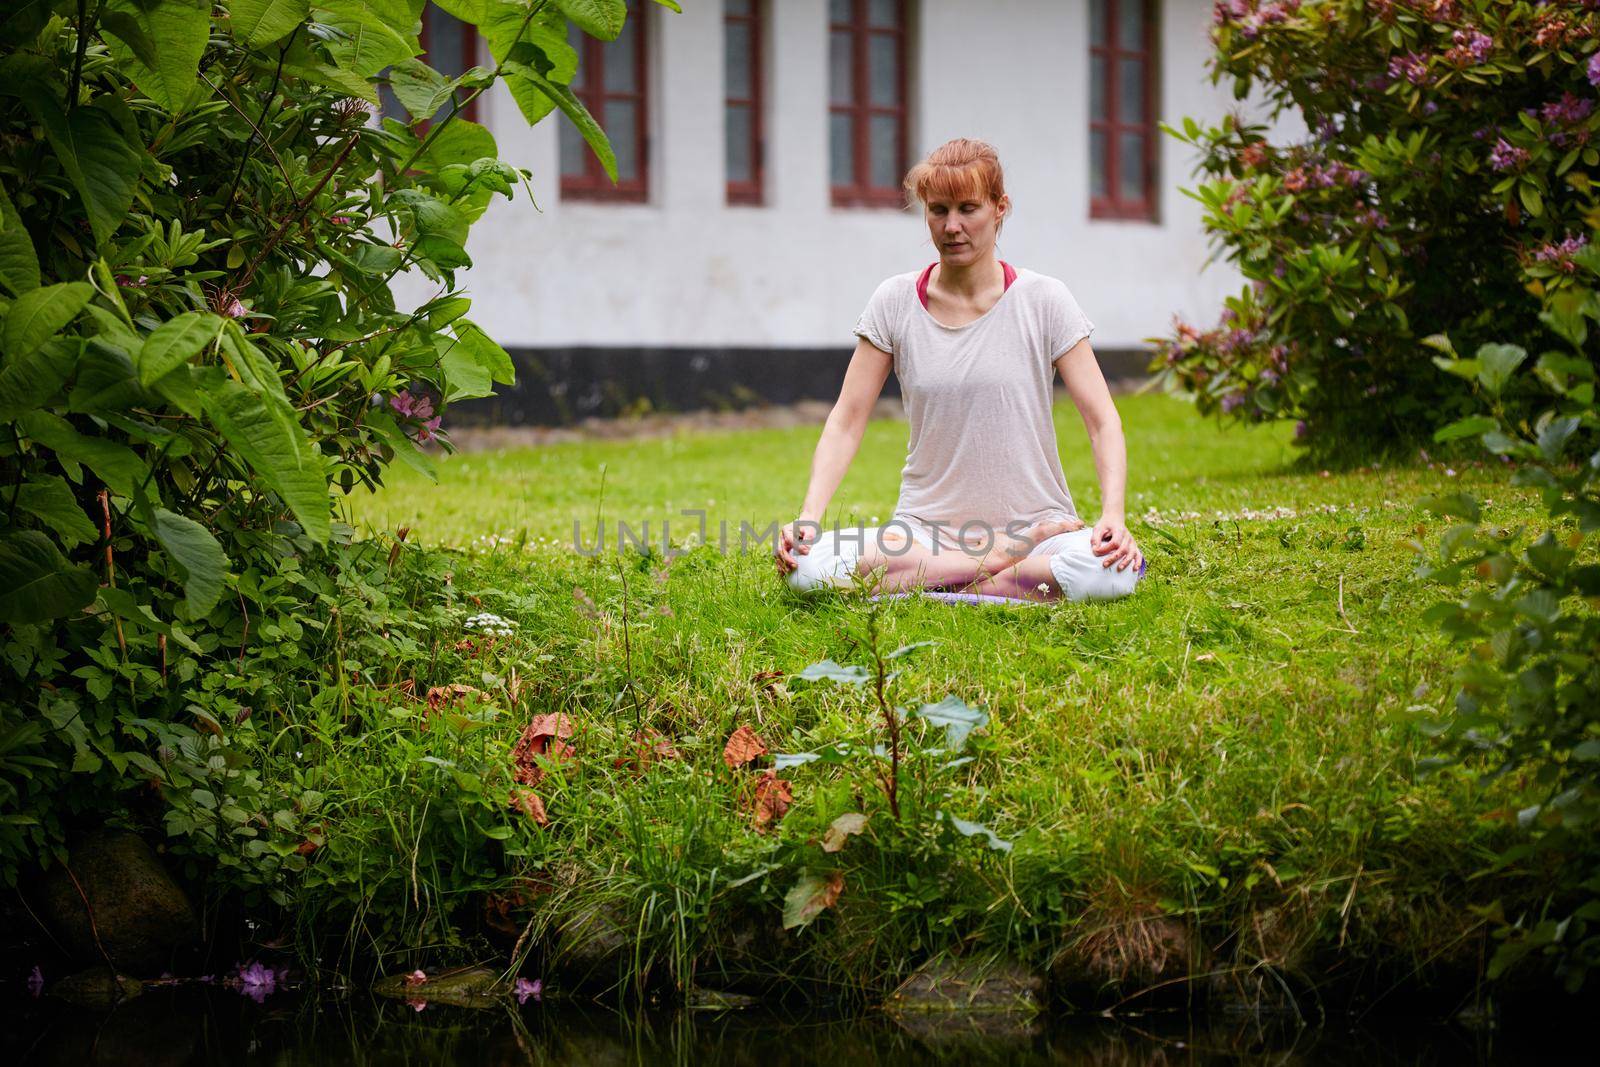 Contemplation and nature. a woman sitting in the lotus position in her backyard